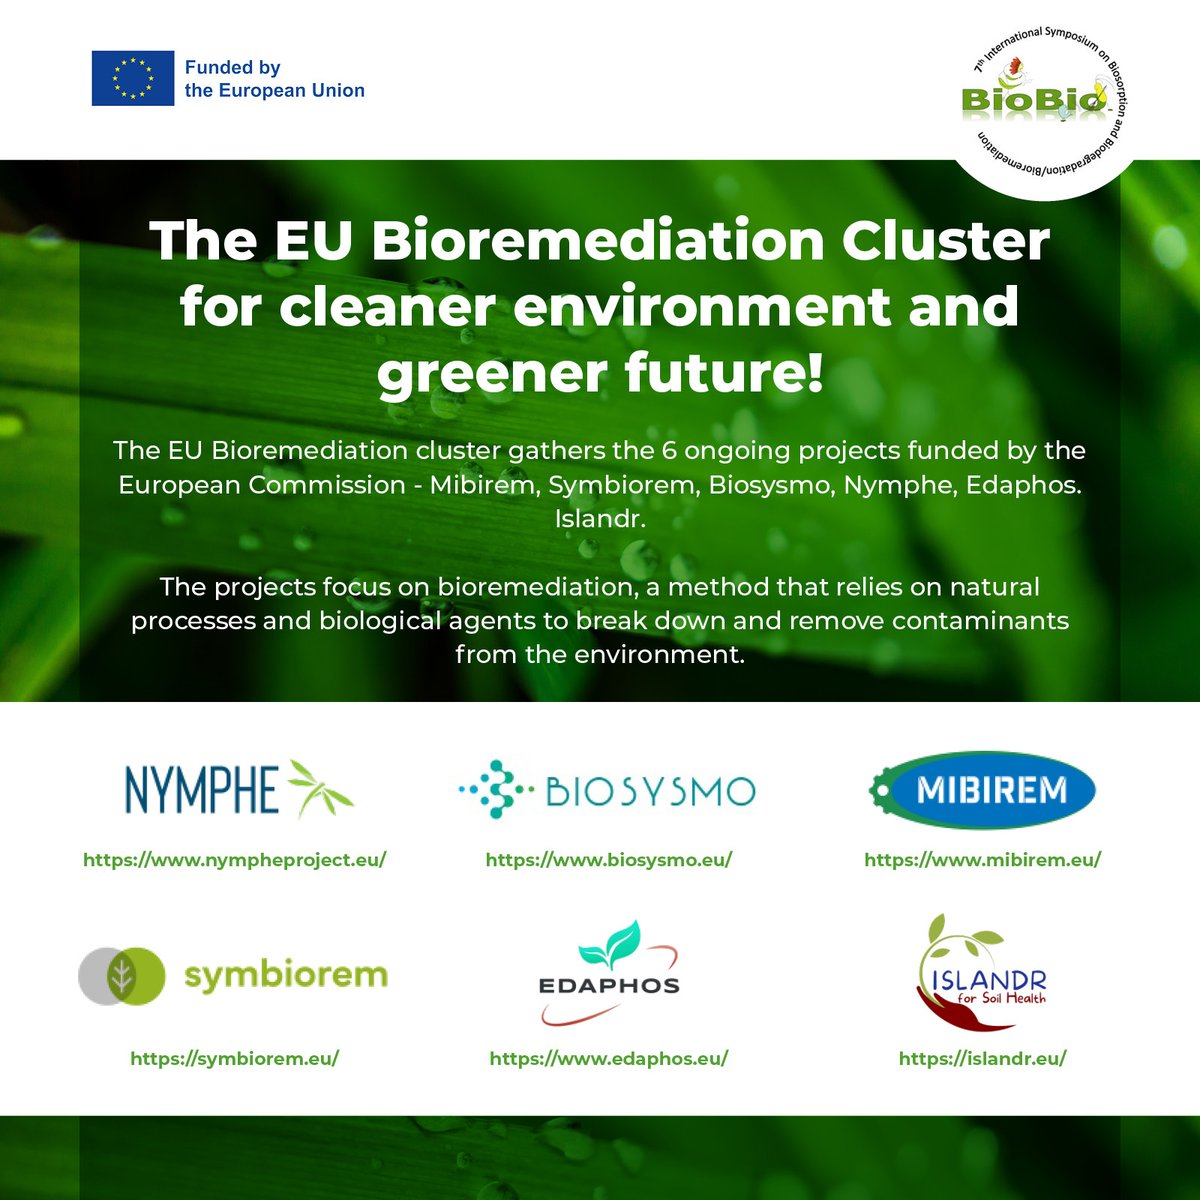 The #BioBio2024 Conference (Prague, 16-20 June) will host the 2nd EU #bioremediation event. On 20/6 at 8.30 all EU-funded projects on bioremediation @symbiorem_eu, @mibirem, @Nympheproject, @biosysmo, @EDAPHOSproject and @ISLANDR_HEU will share their latest results (1/3)